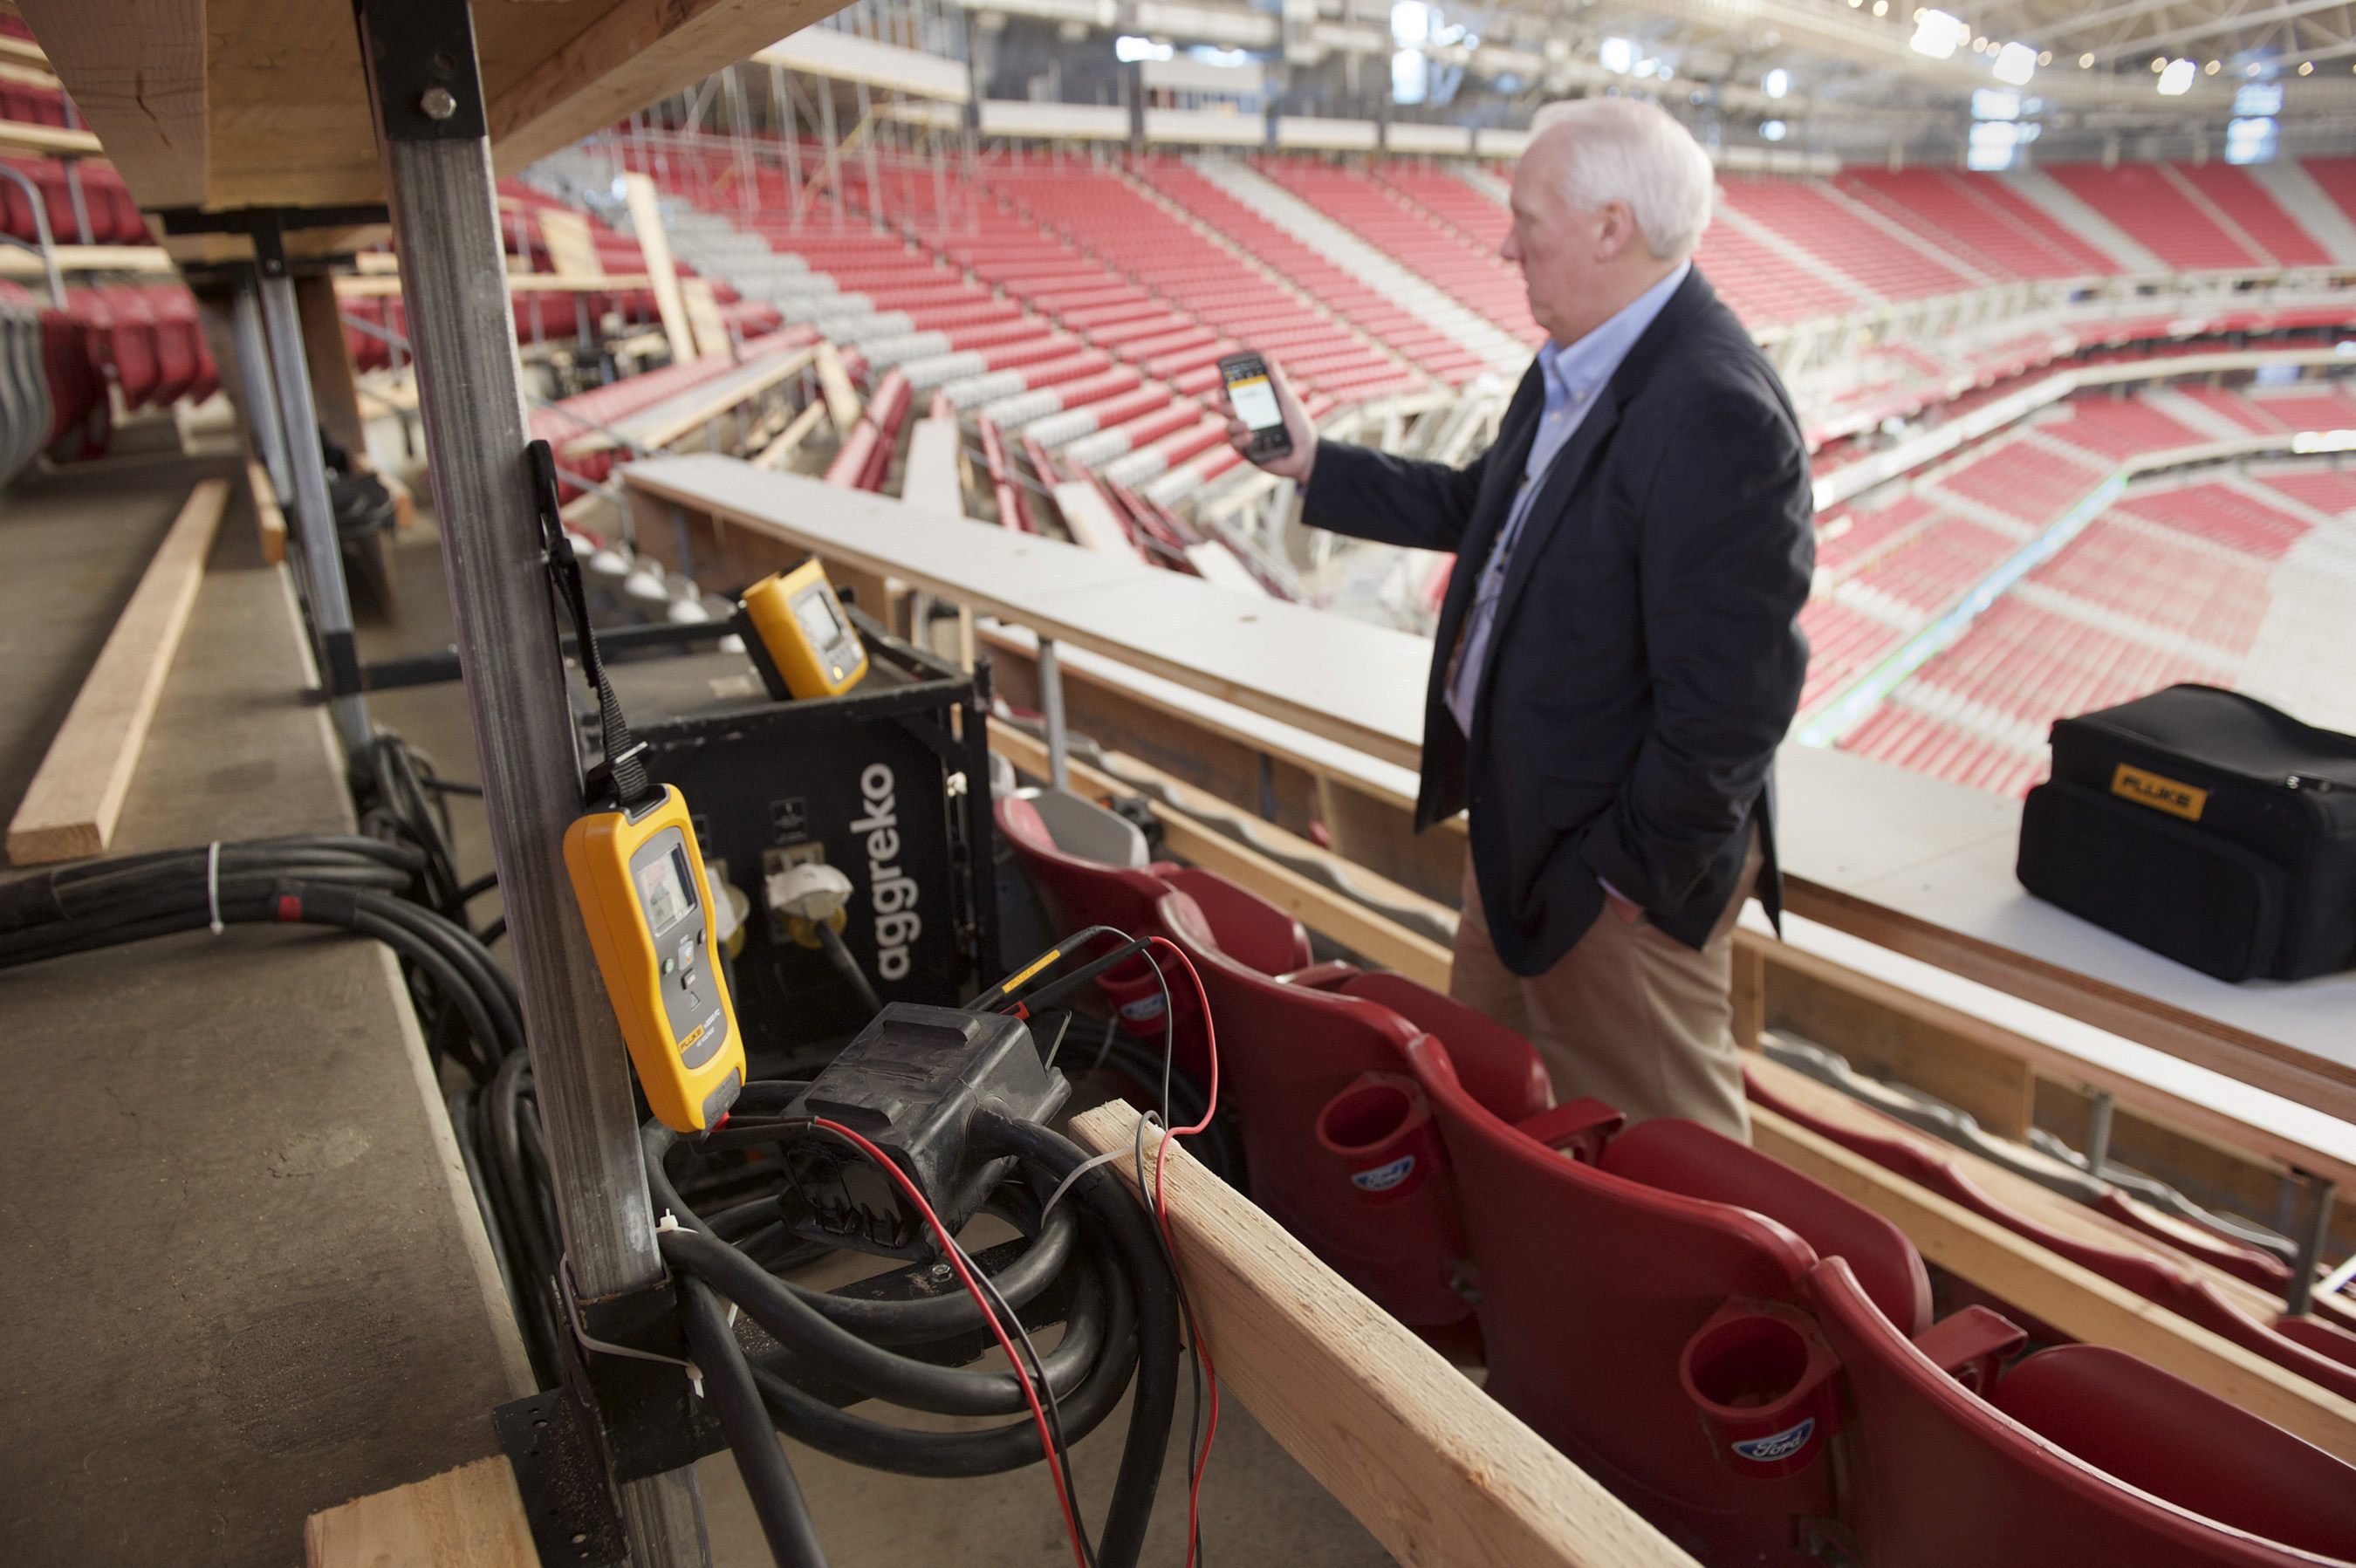 The company is responsible for electrical/communications network reliability at the University of Phoenix stadium hosting the big game and part of their arsenal to keep it all working is Fluke tools.